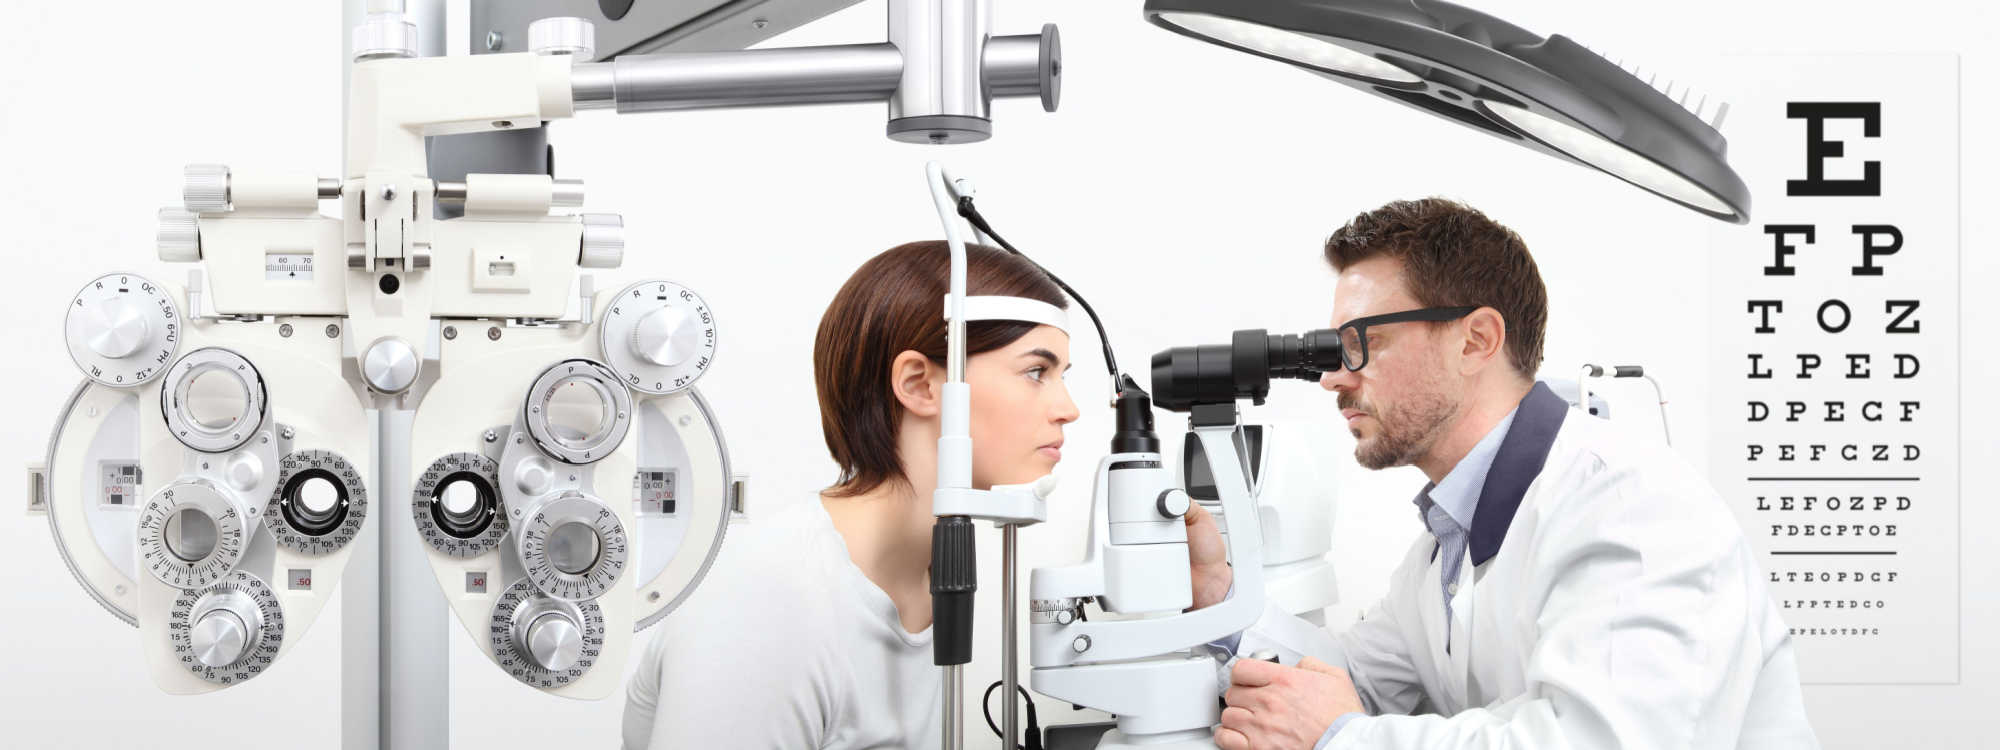 Image showing a female patient being examined with a slit lamp. Phoropter and eye chart also visible in the photo,